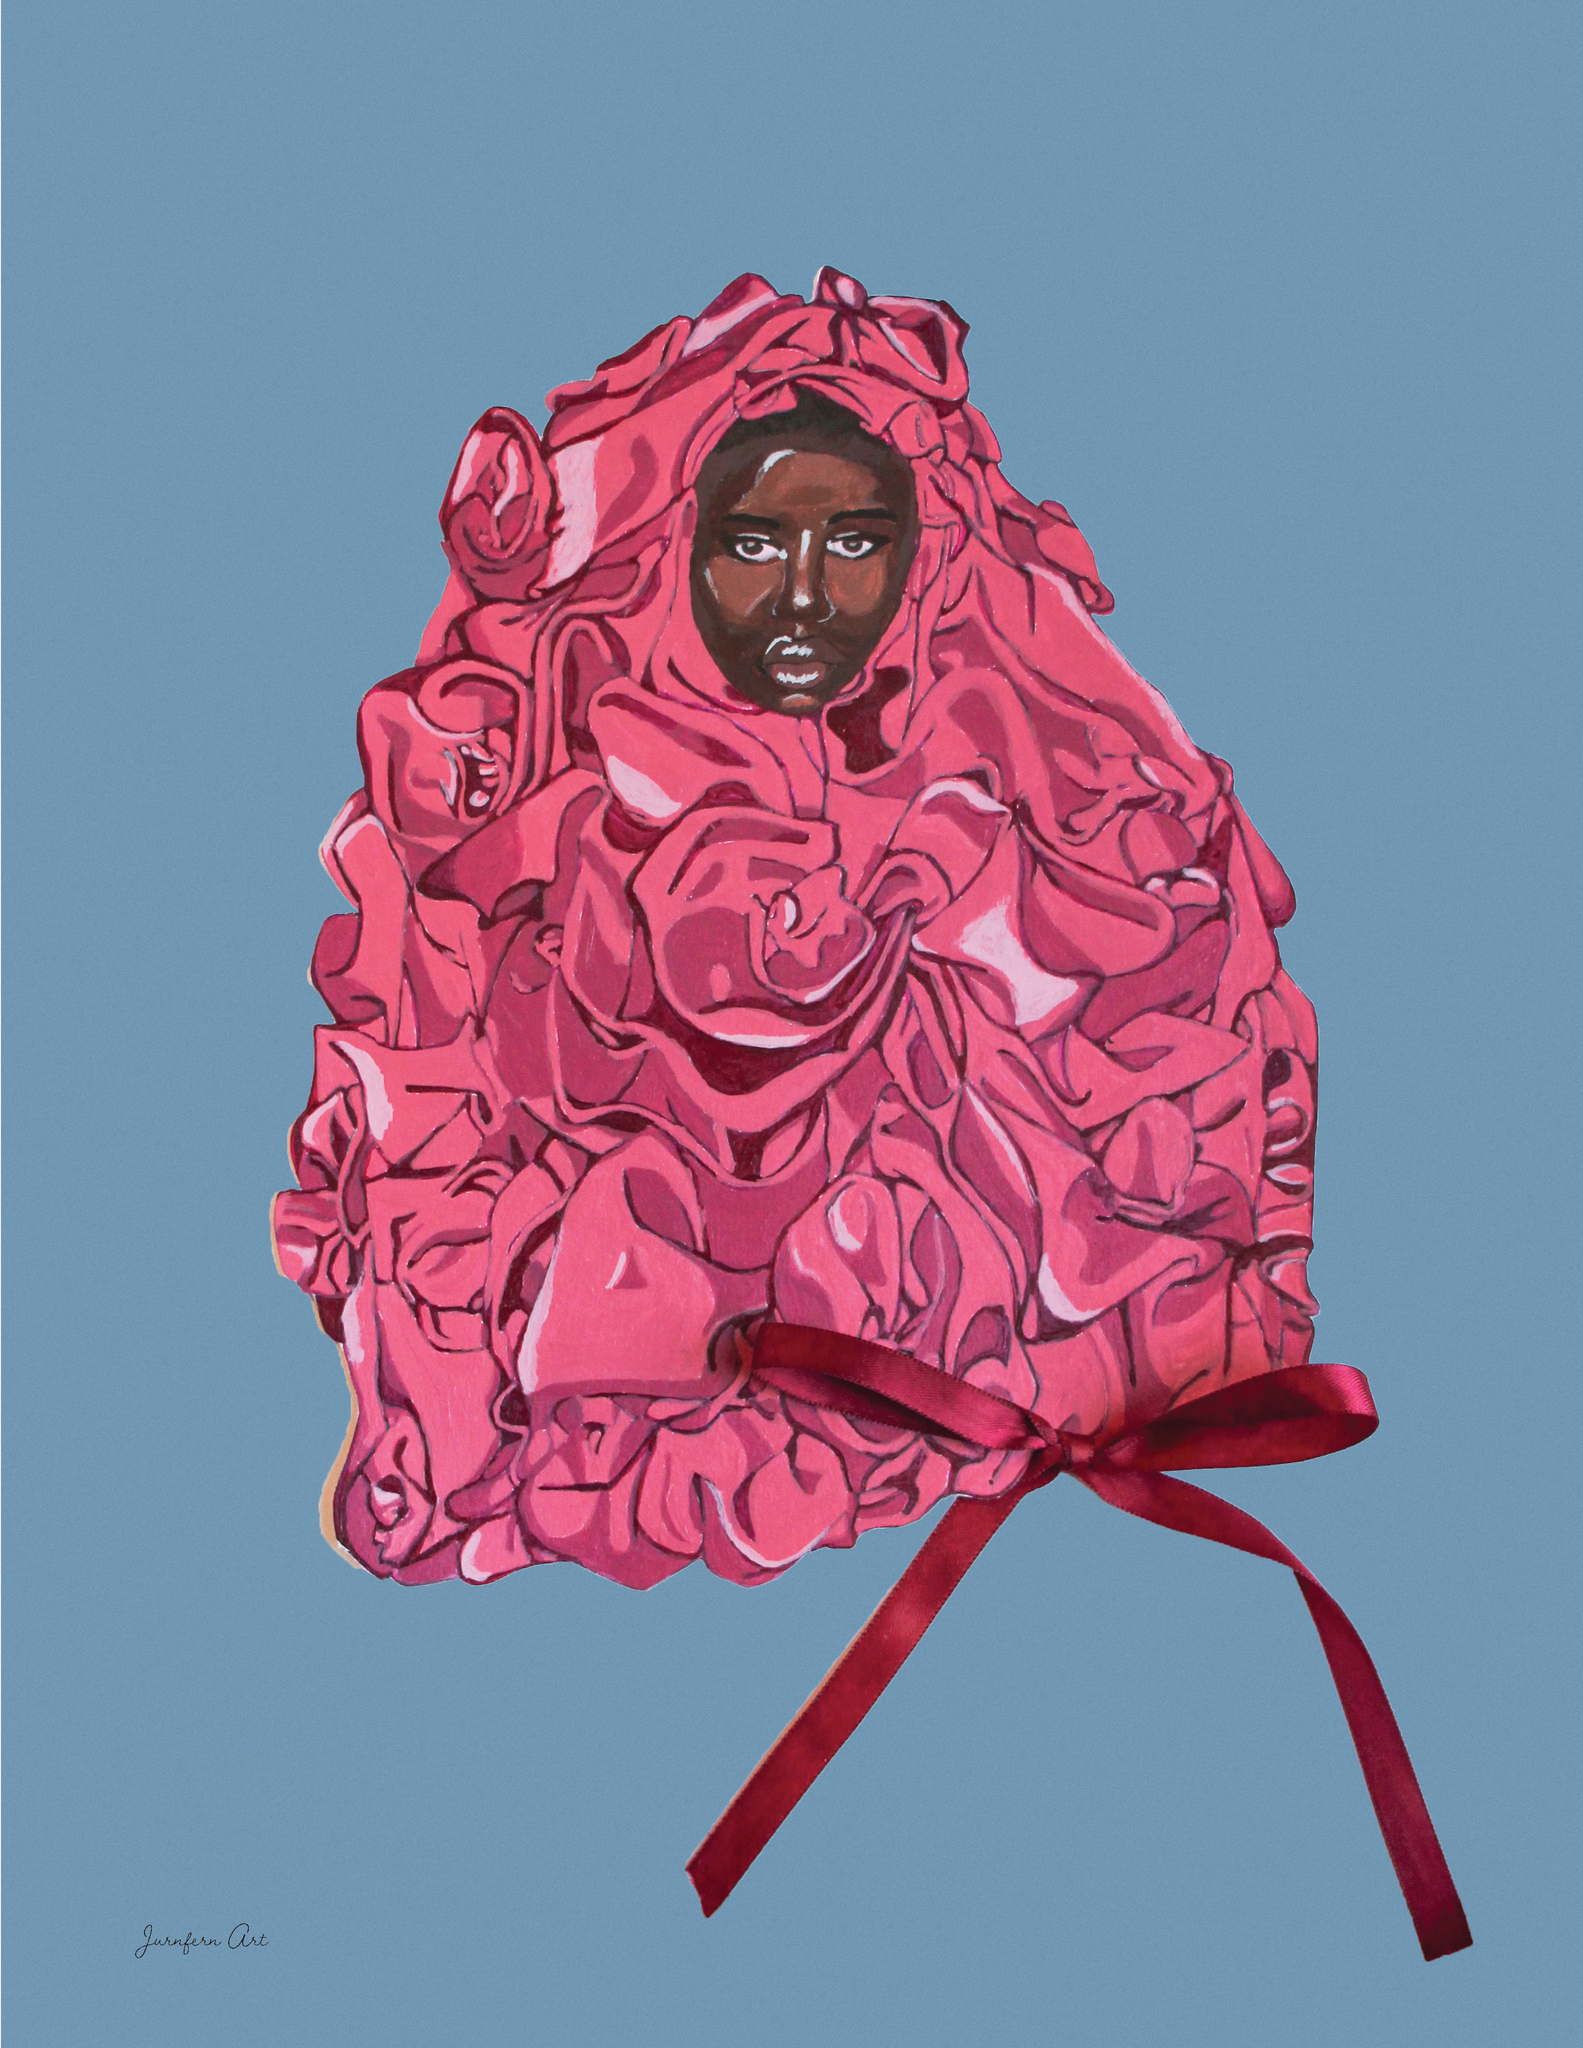 An art print with an illustration of Black supermodel Adut Akech wearing a pink Valentino gown with a bow on it, with a light blue background